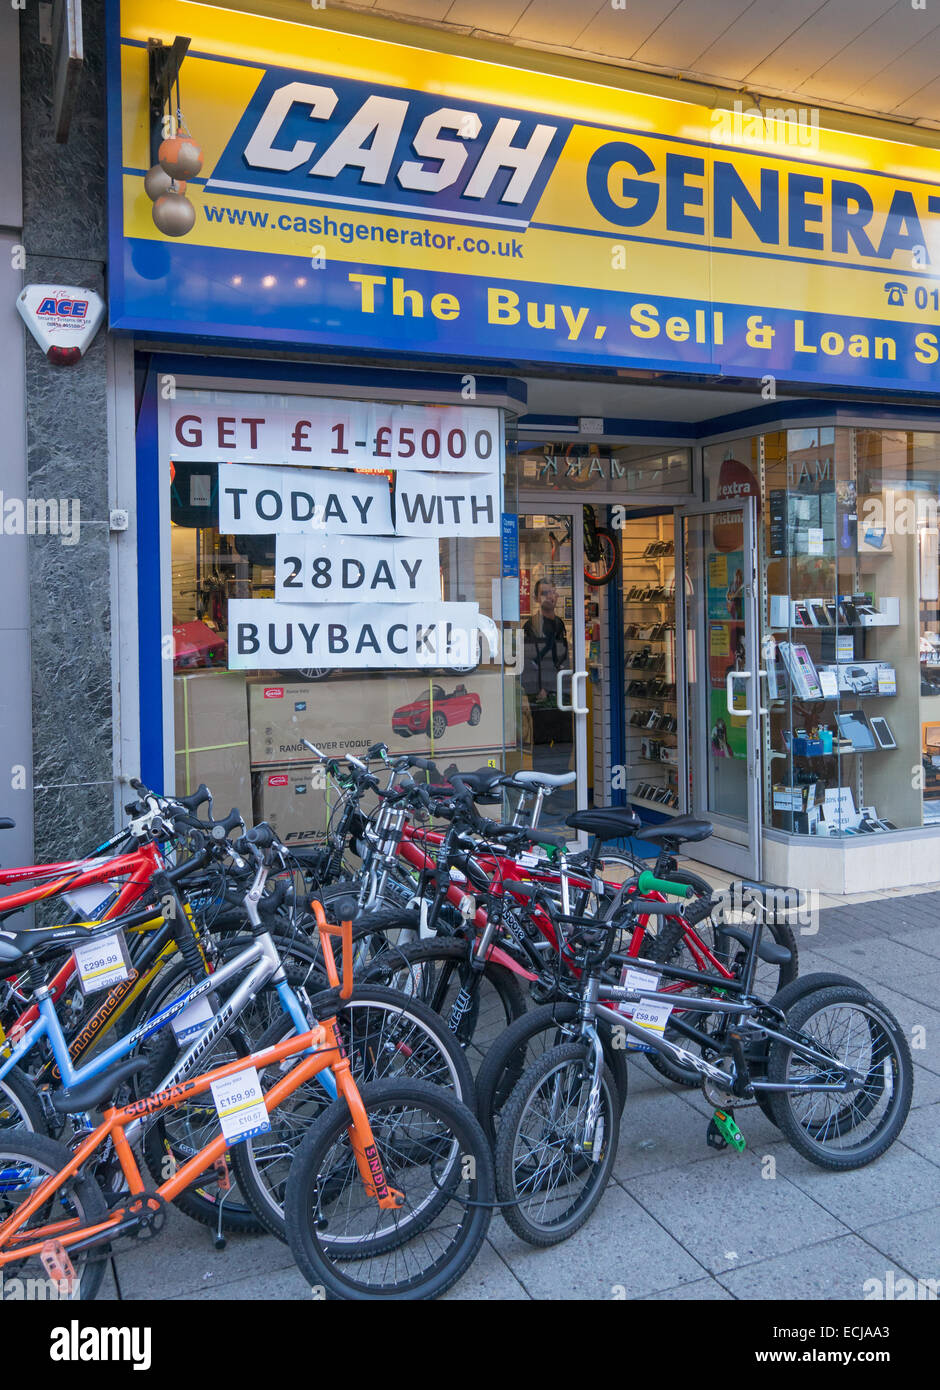 Cash Generator pawn shop with Xmas bikes for sale and 28 day buyback notice Sunderland, north east England, UK Stock Photo